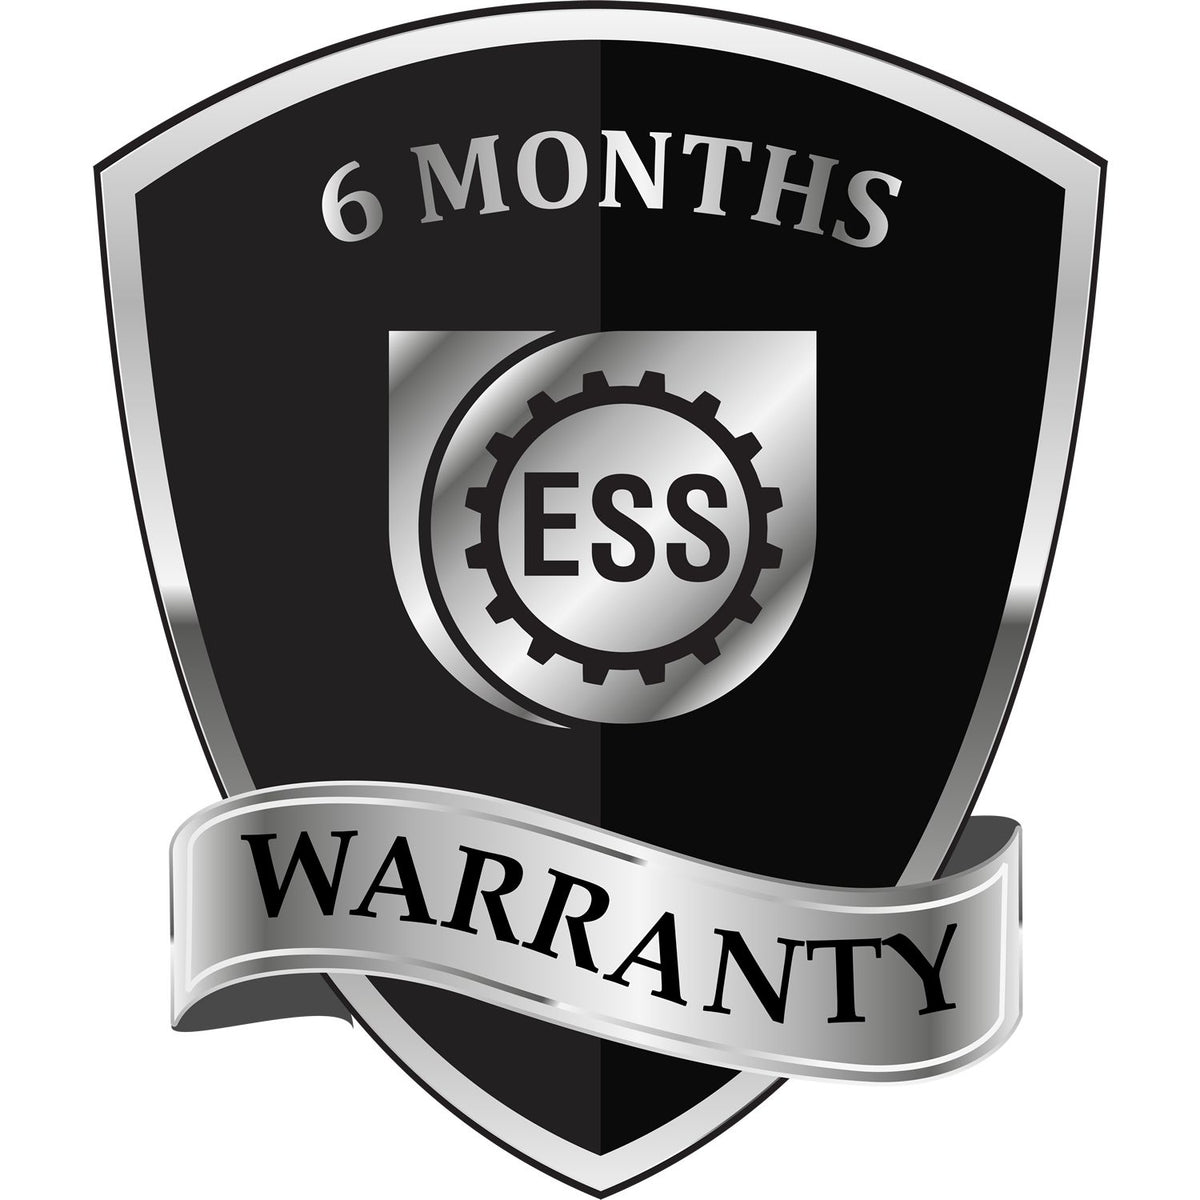 A badge or emblem showing a warranty icon for the Washington Professional Engineer Seal Stamp